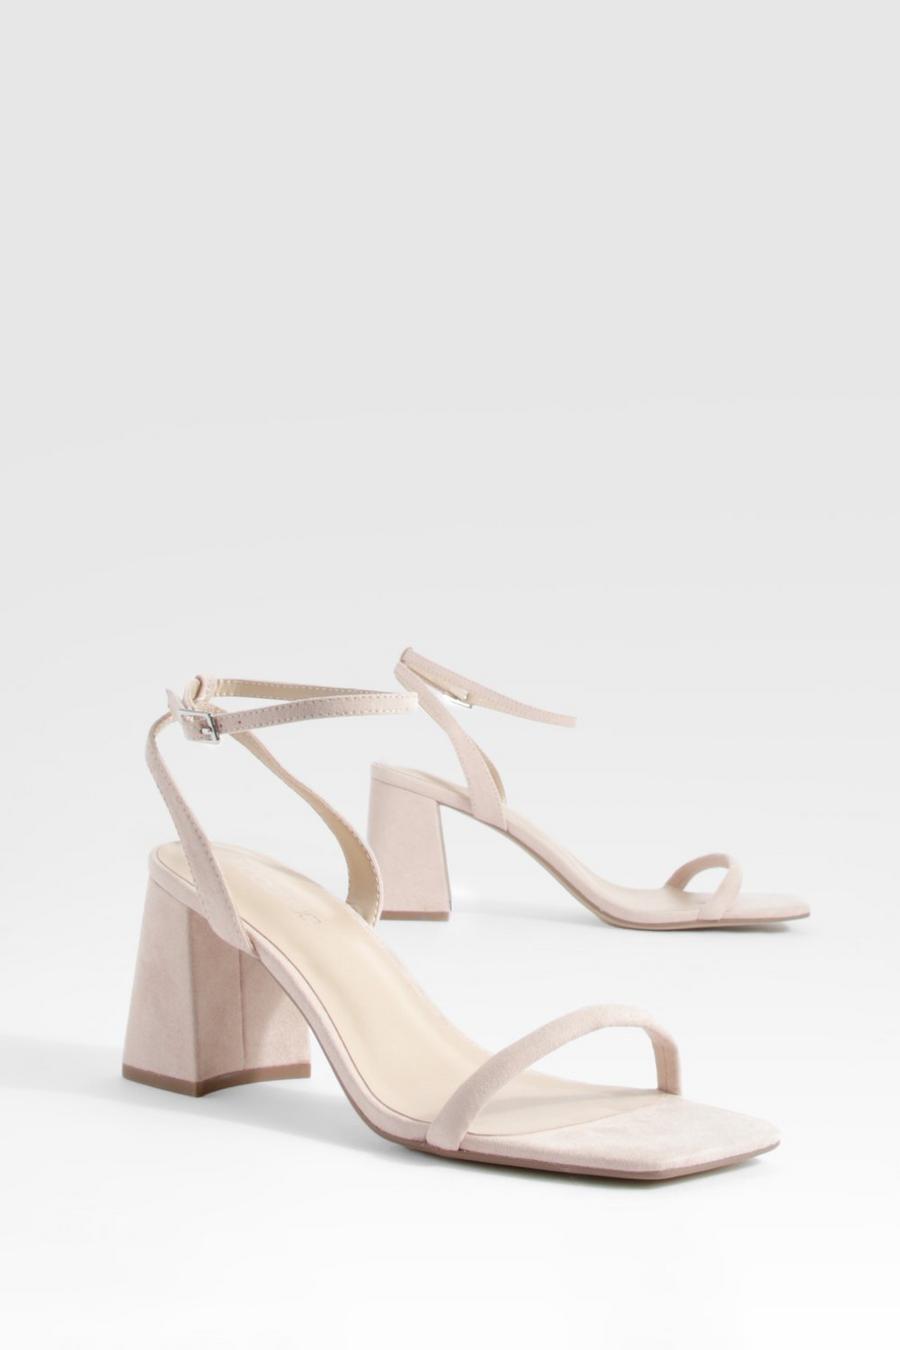 Nude color carne Padded Strap Mid Heel Strappy Sandals 